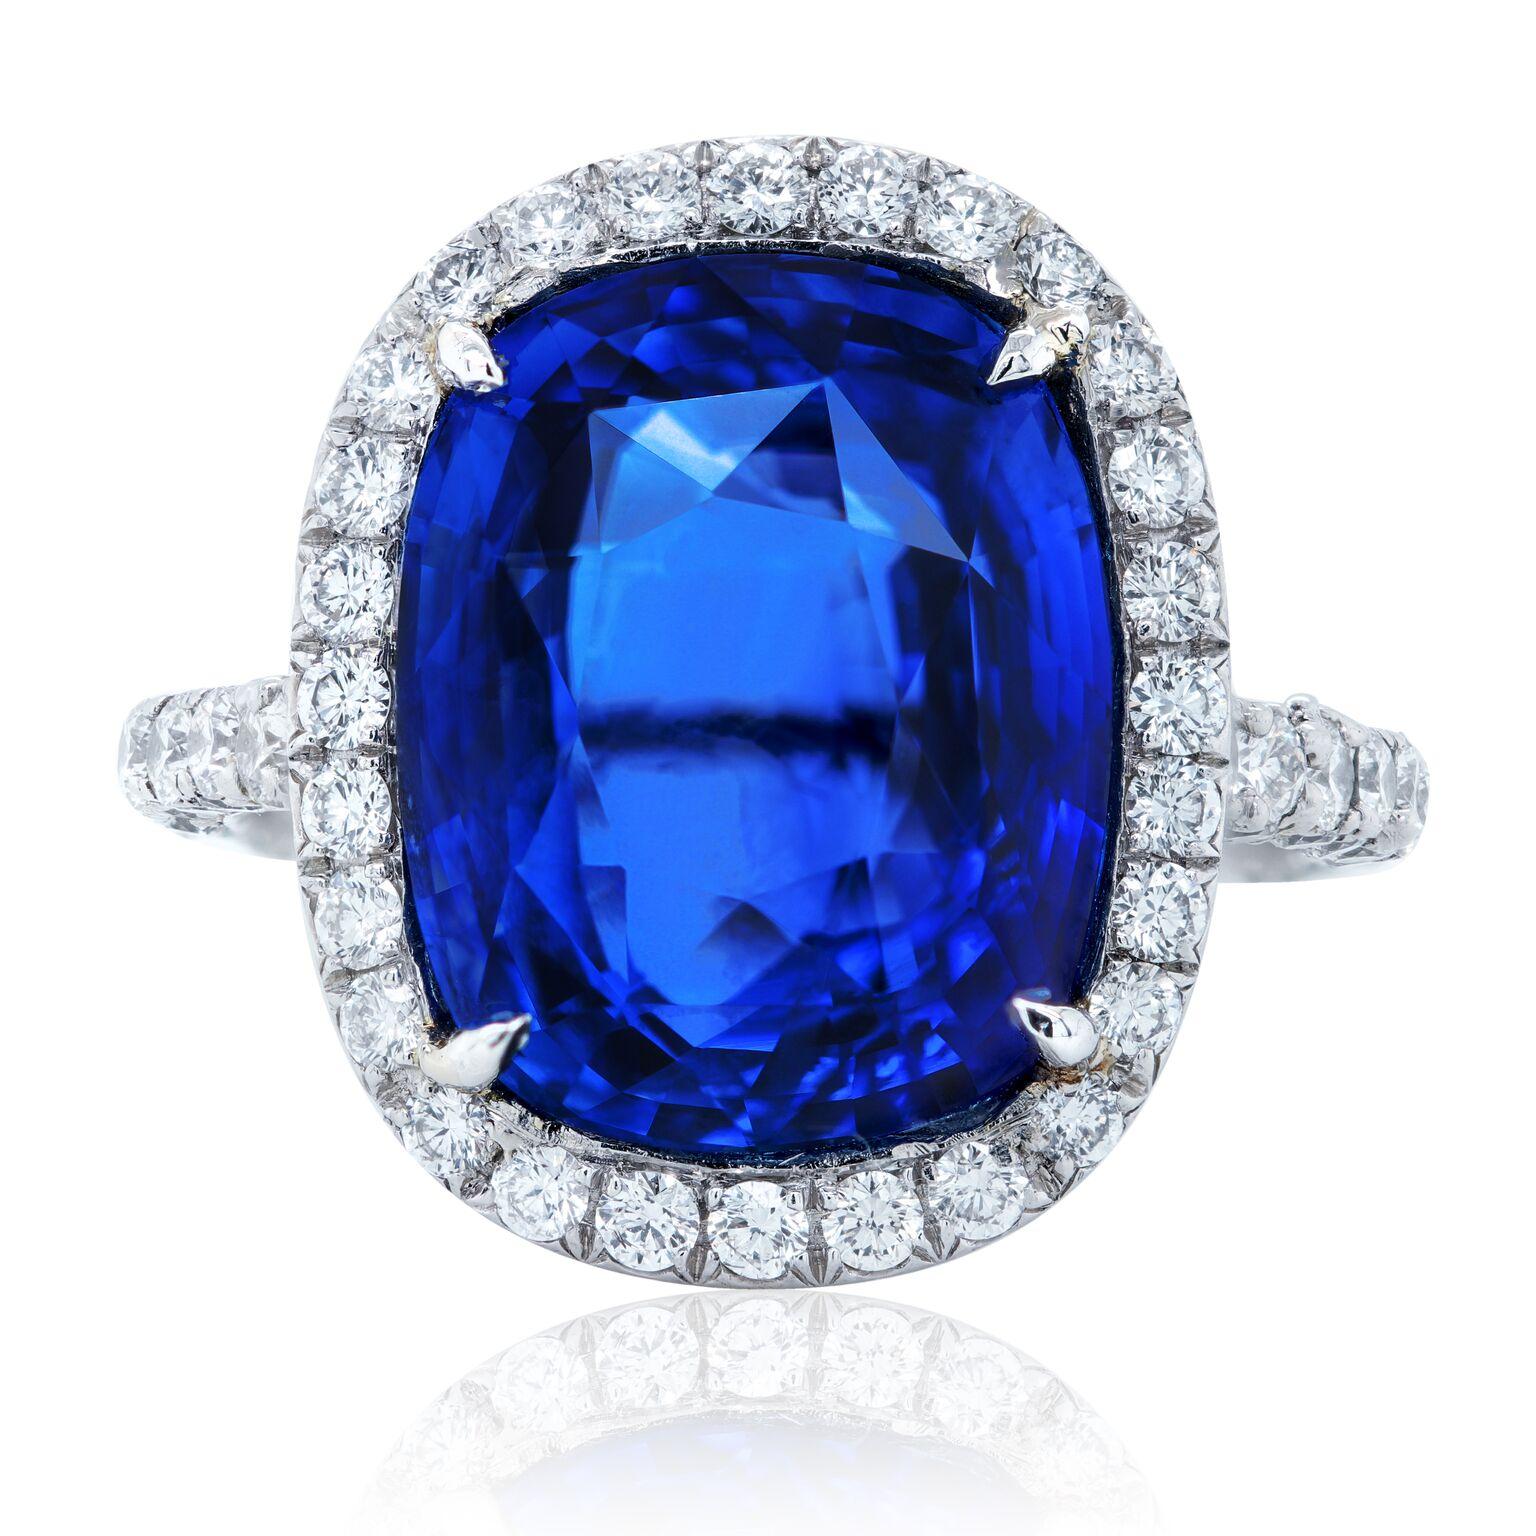 Platinum sapphire and diamond ring featuring a 9.55 ct GIC certified cushion cut sapphire with 1.80 cts tw of micropave round diamonds.
Diana M. is a leading supplier of top-quality fine jewelry for over 35 years.
Diana M is one-stop shop for all